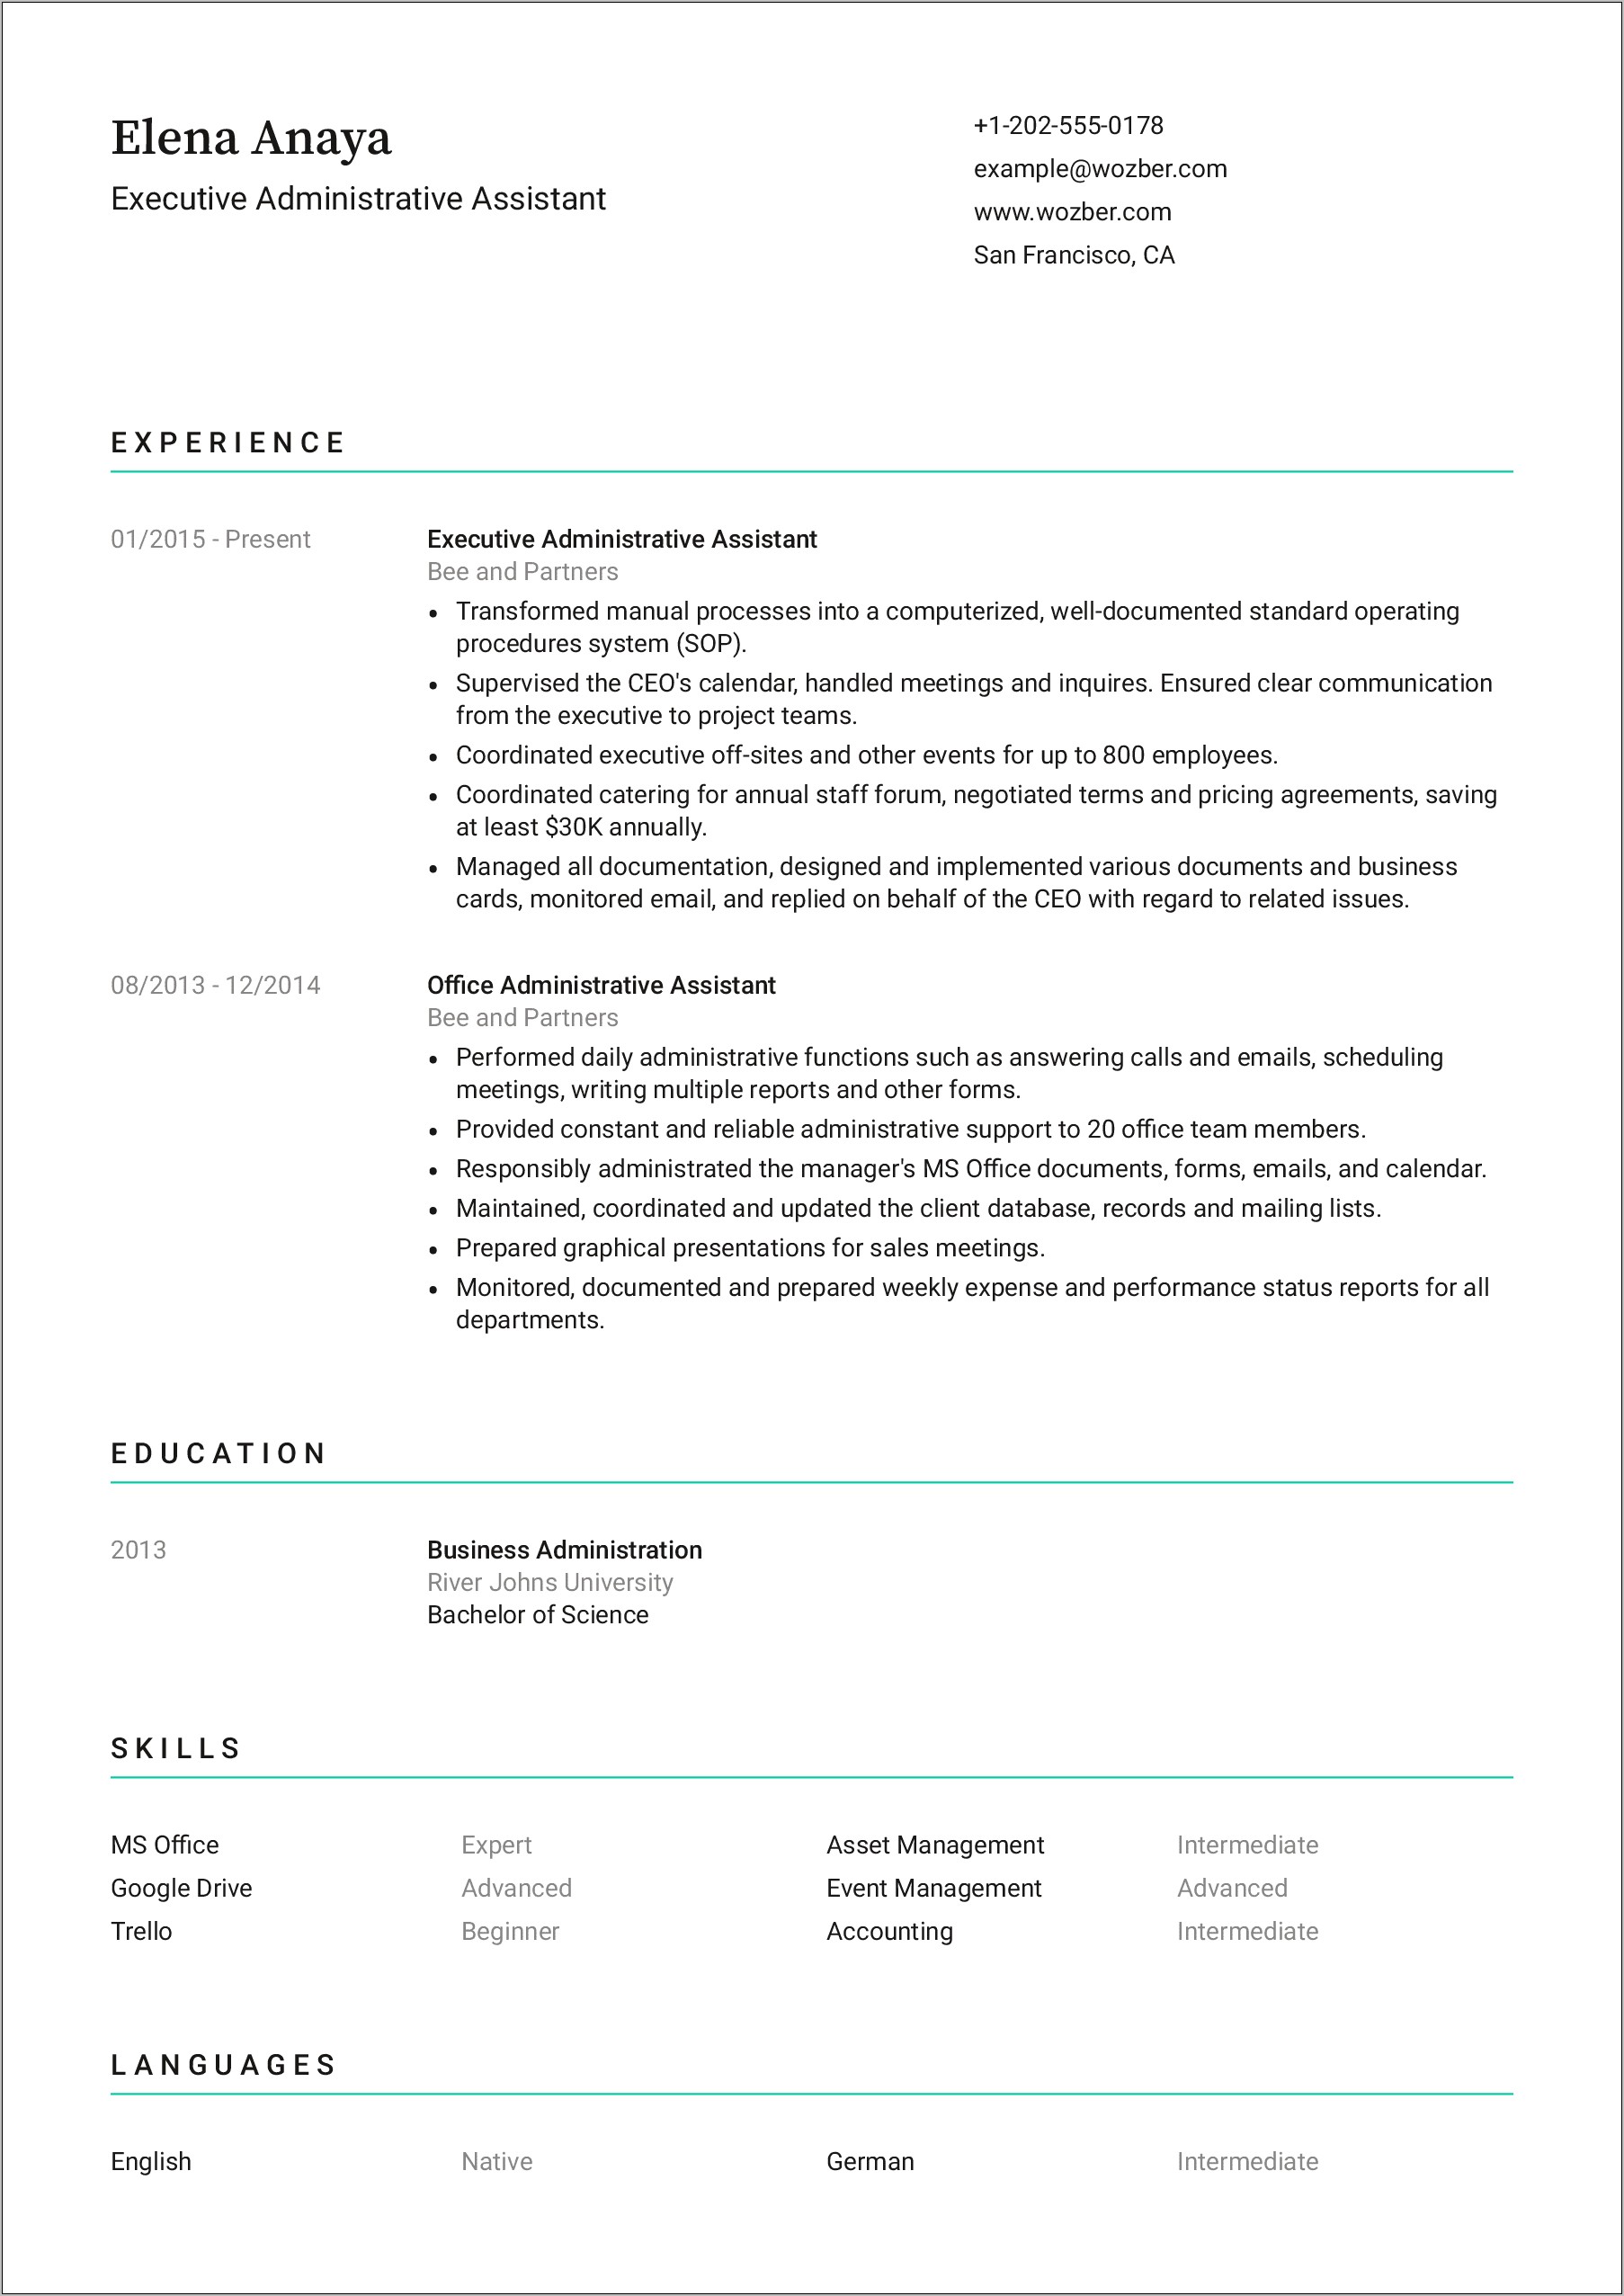 Executive Administrative Assistant Resume Objective